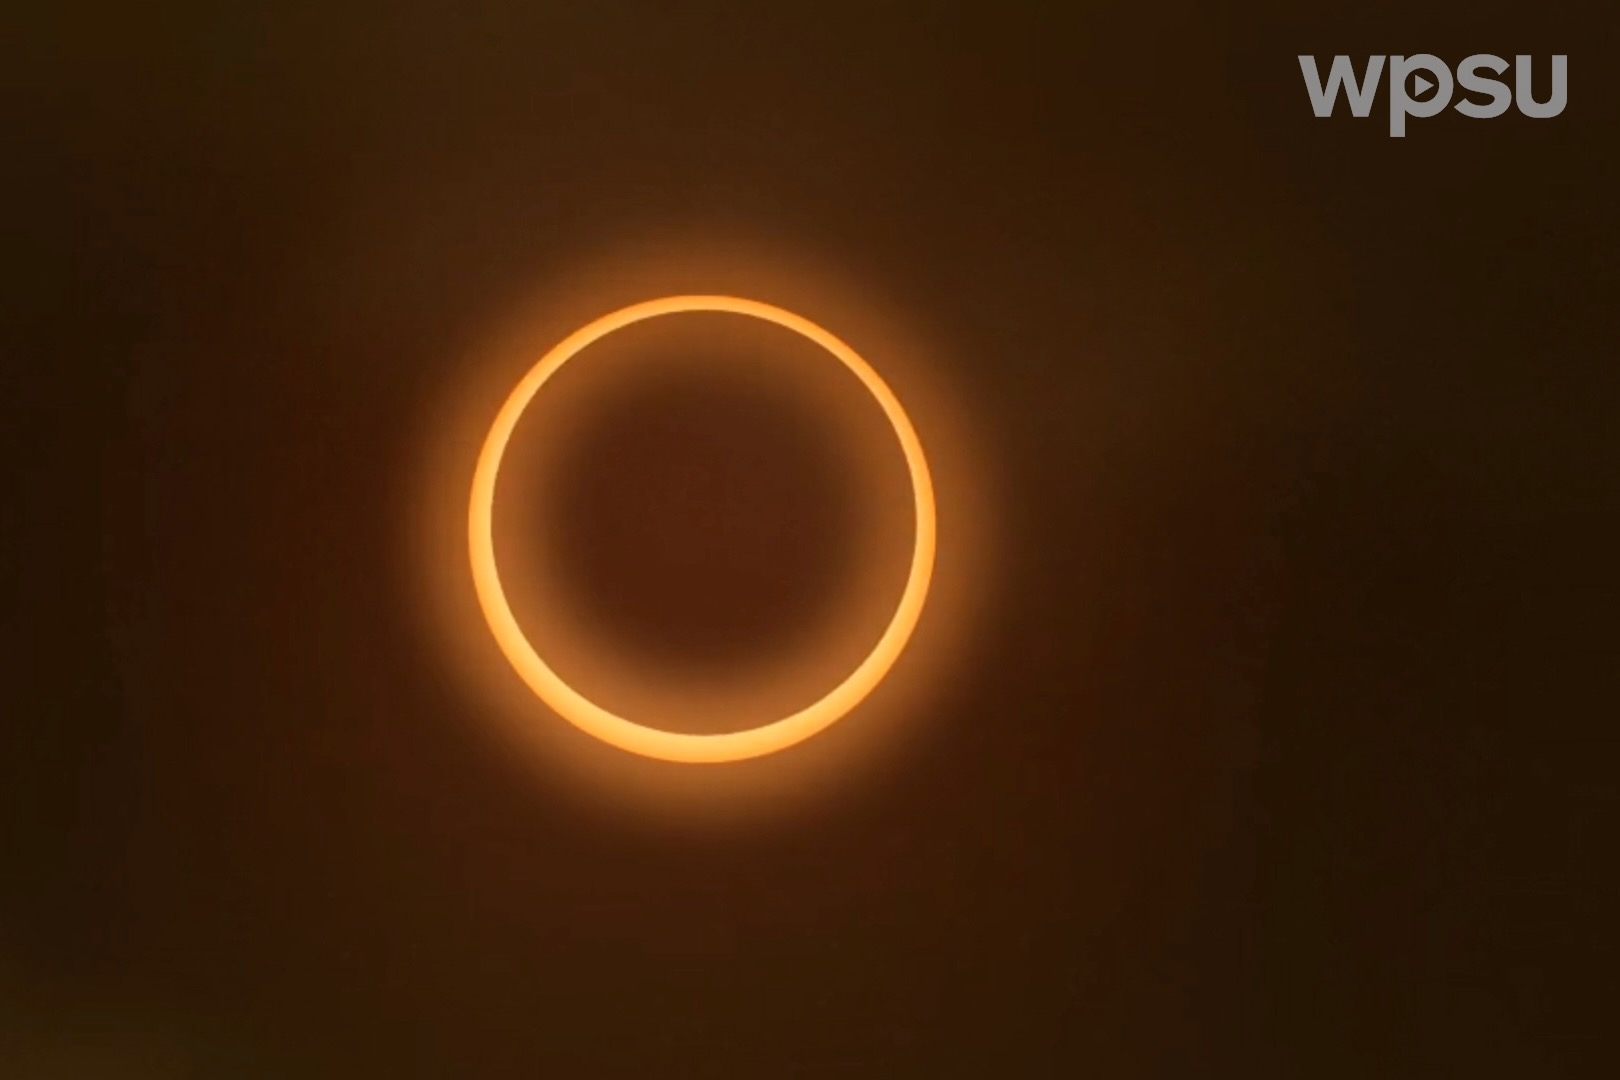 An image of the moon in front of the sun in an annular solar eclipse.